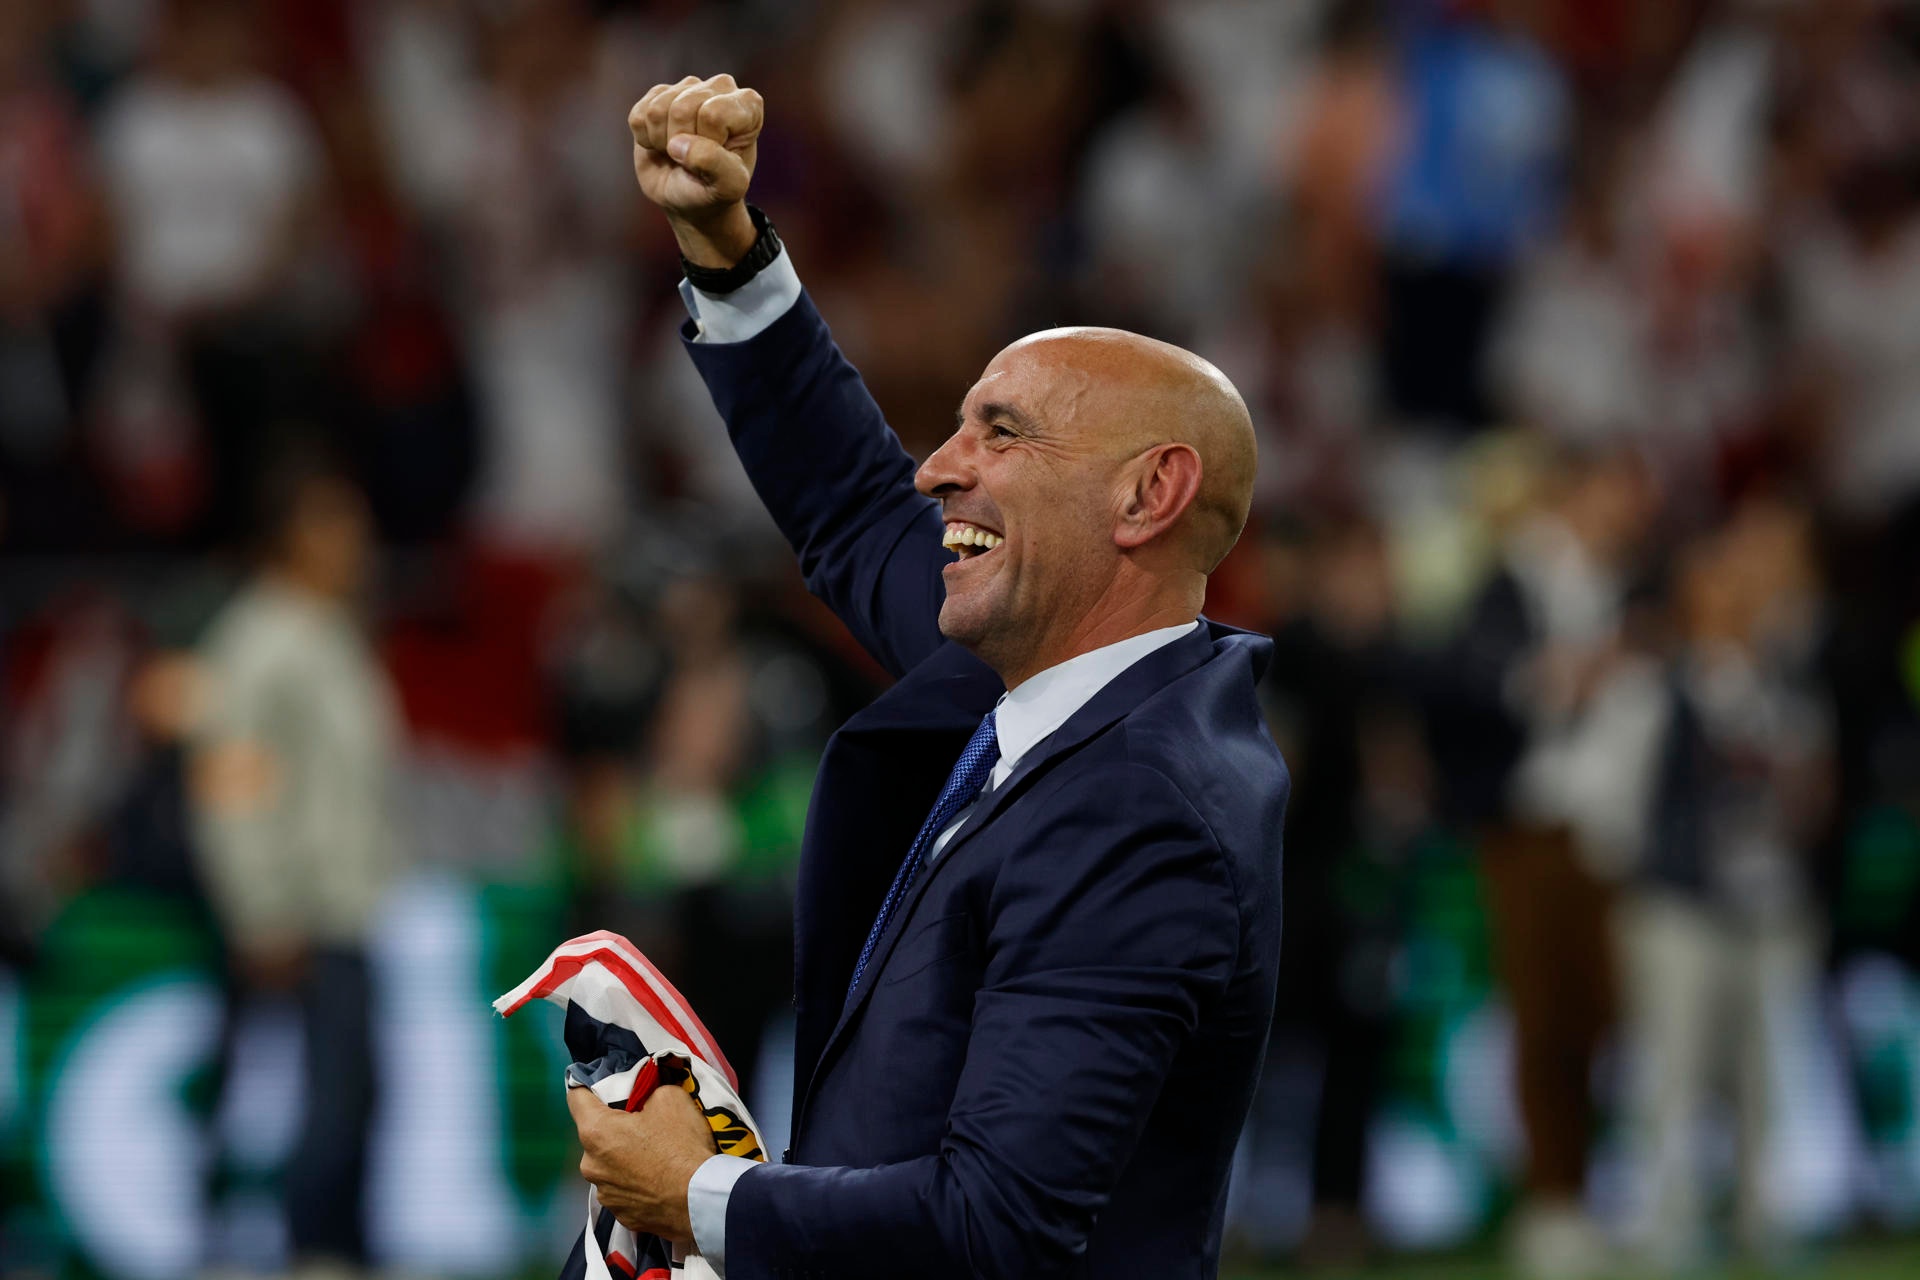 Sporting director, Monchi is headed for the Premier League. EFE